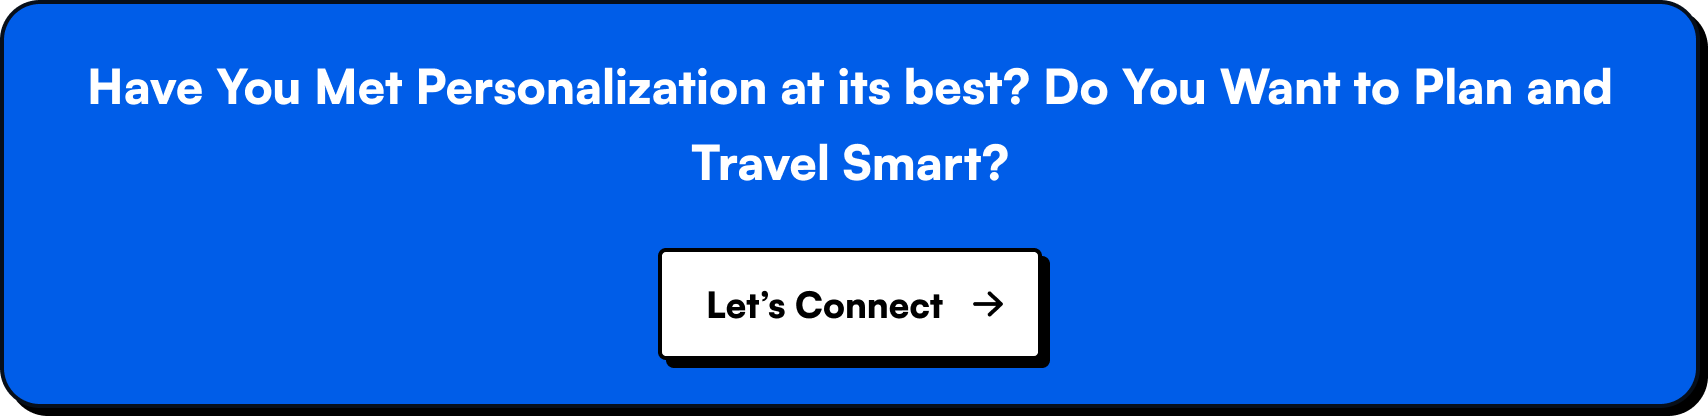 Have You Met Personalization at its best? Do You Want to Plan and Travel Smart?